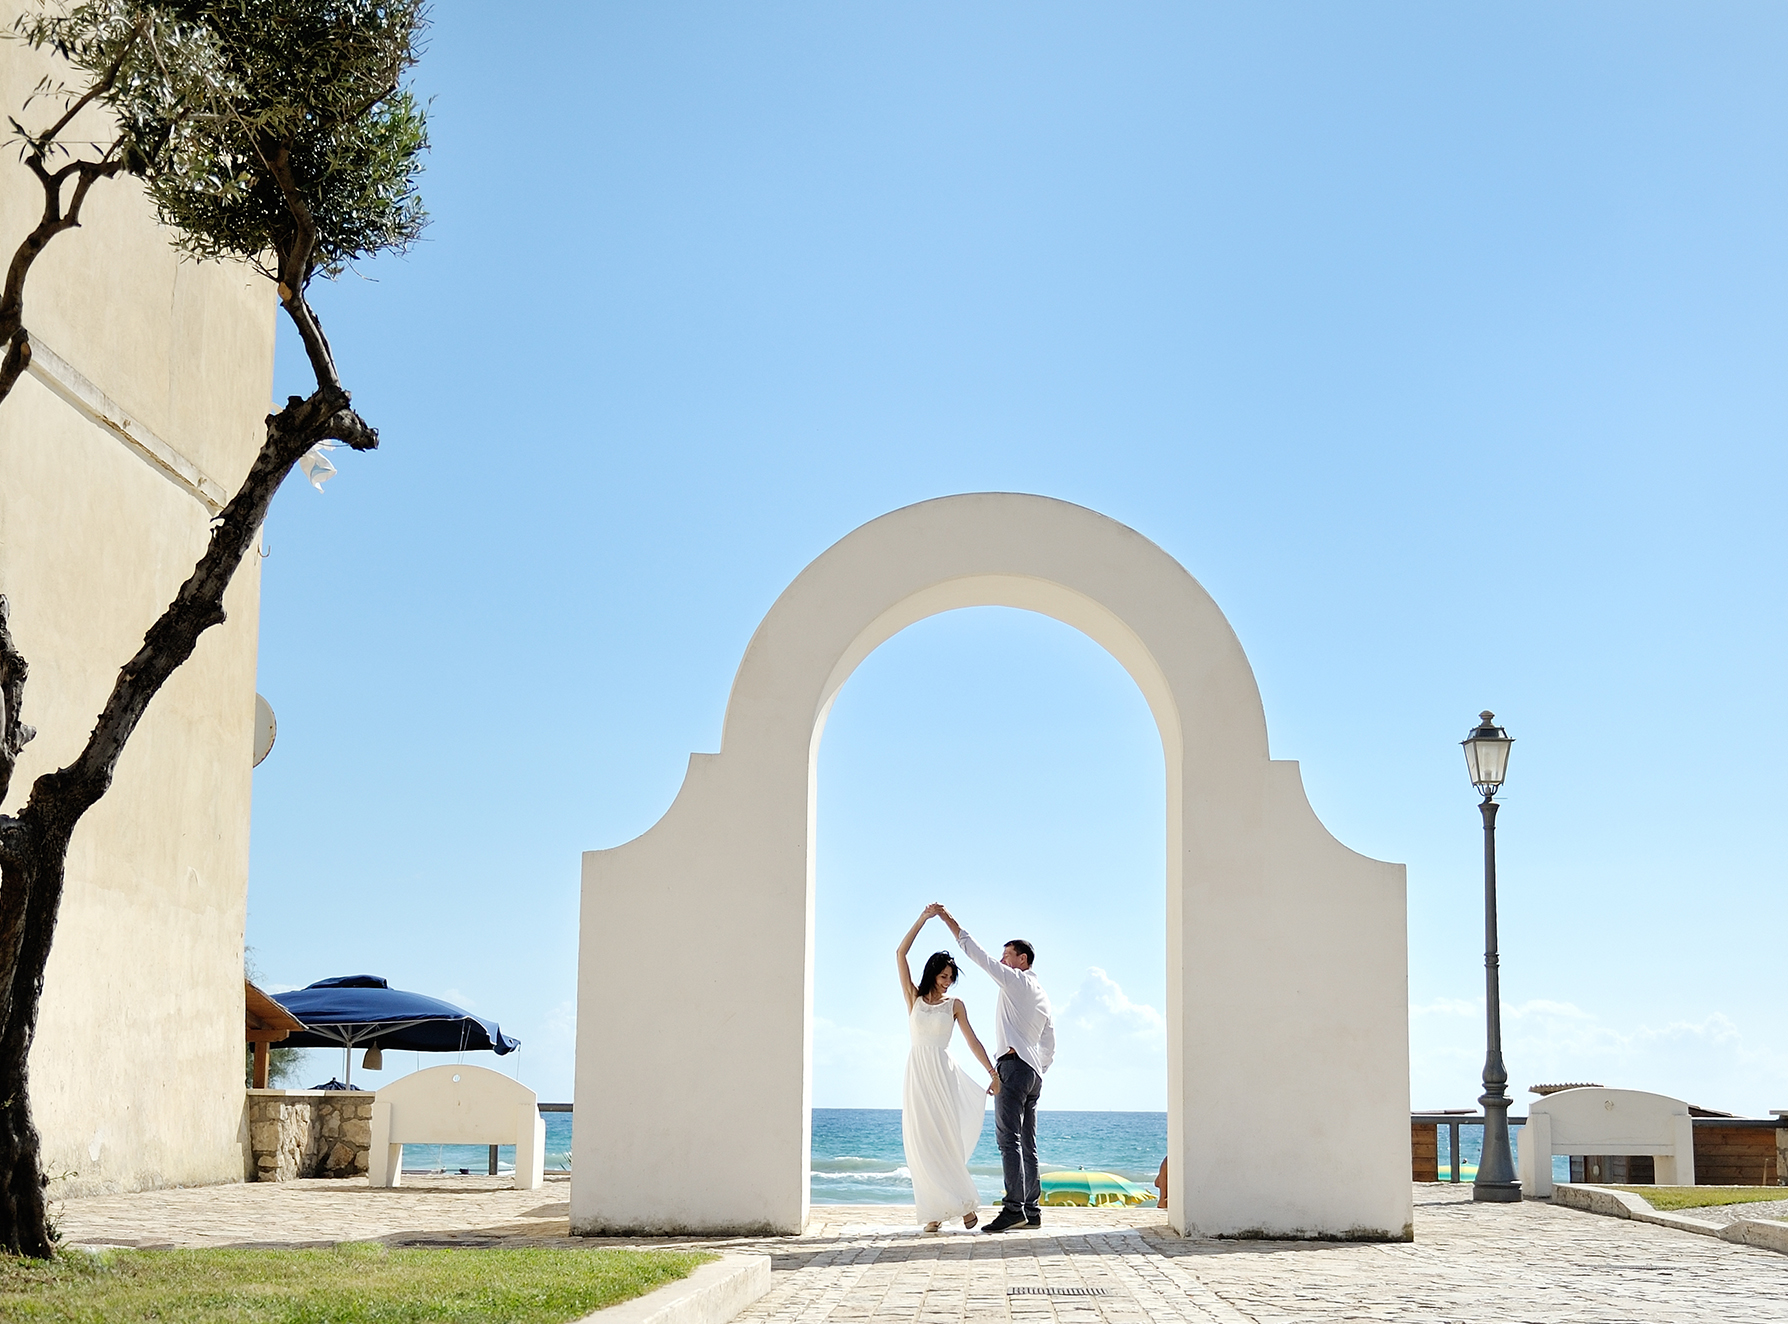 A newly wed couple dancing under a white arch.